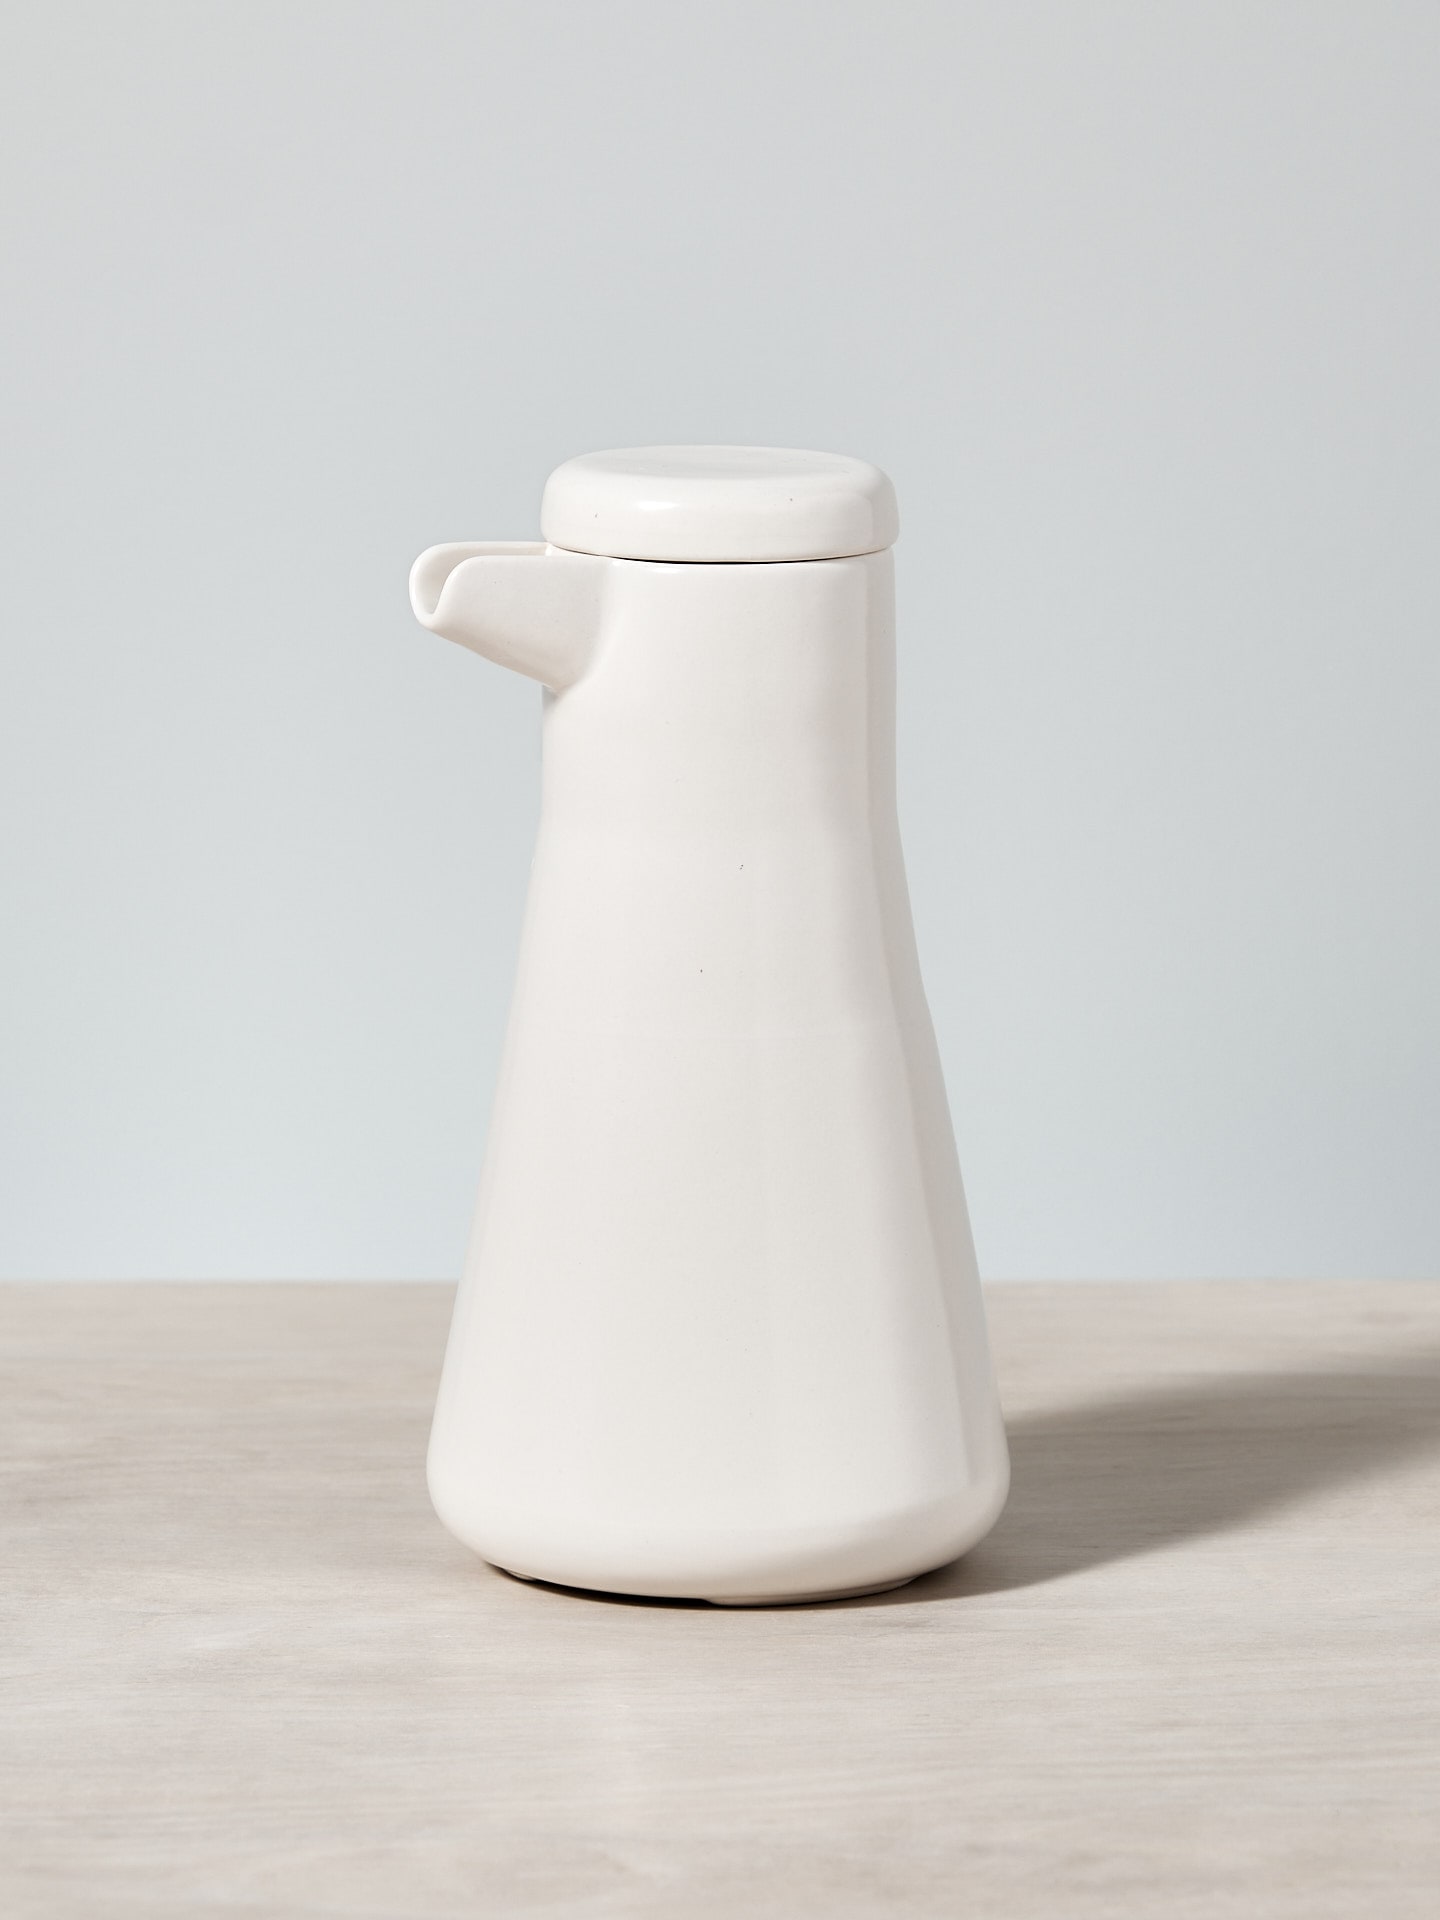 A Large Twin Wall Coffee/Tea Pot - Satin White by Gidon Bing sitting on a wooden table.